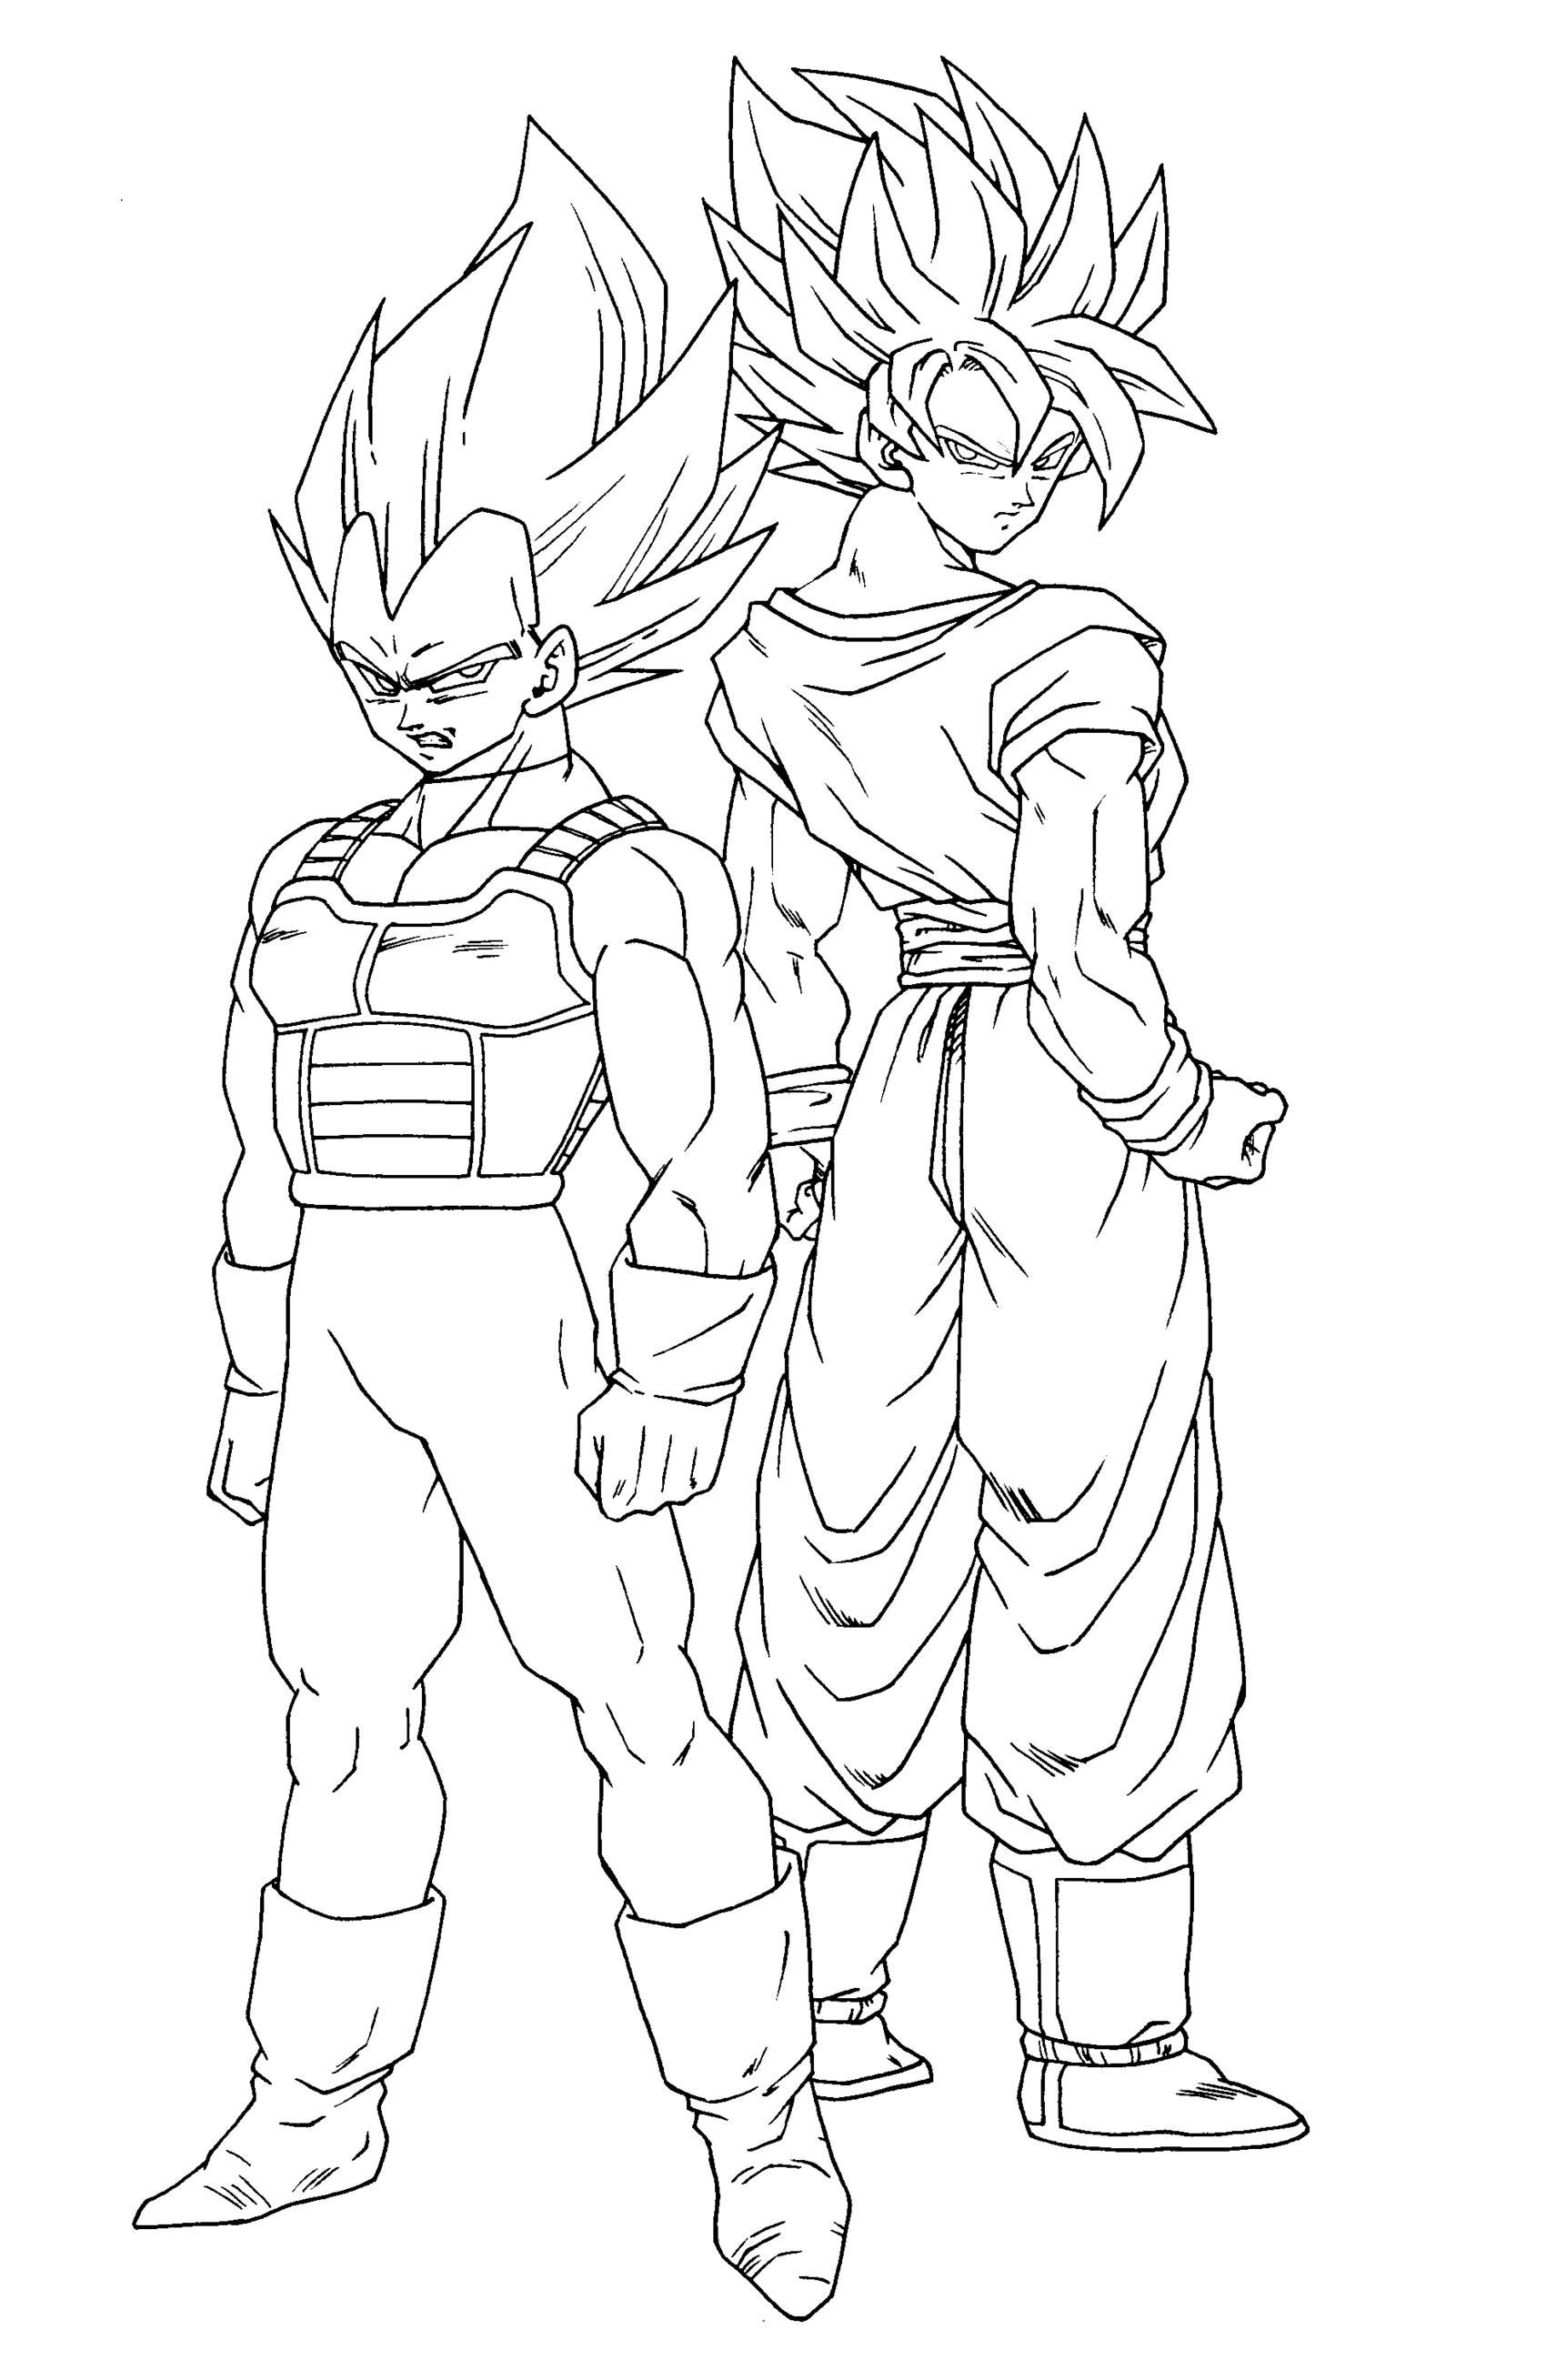 coloriages-dragon-ball-z-6_jpg dans Dragon ball z coloring pages ...